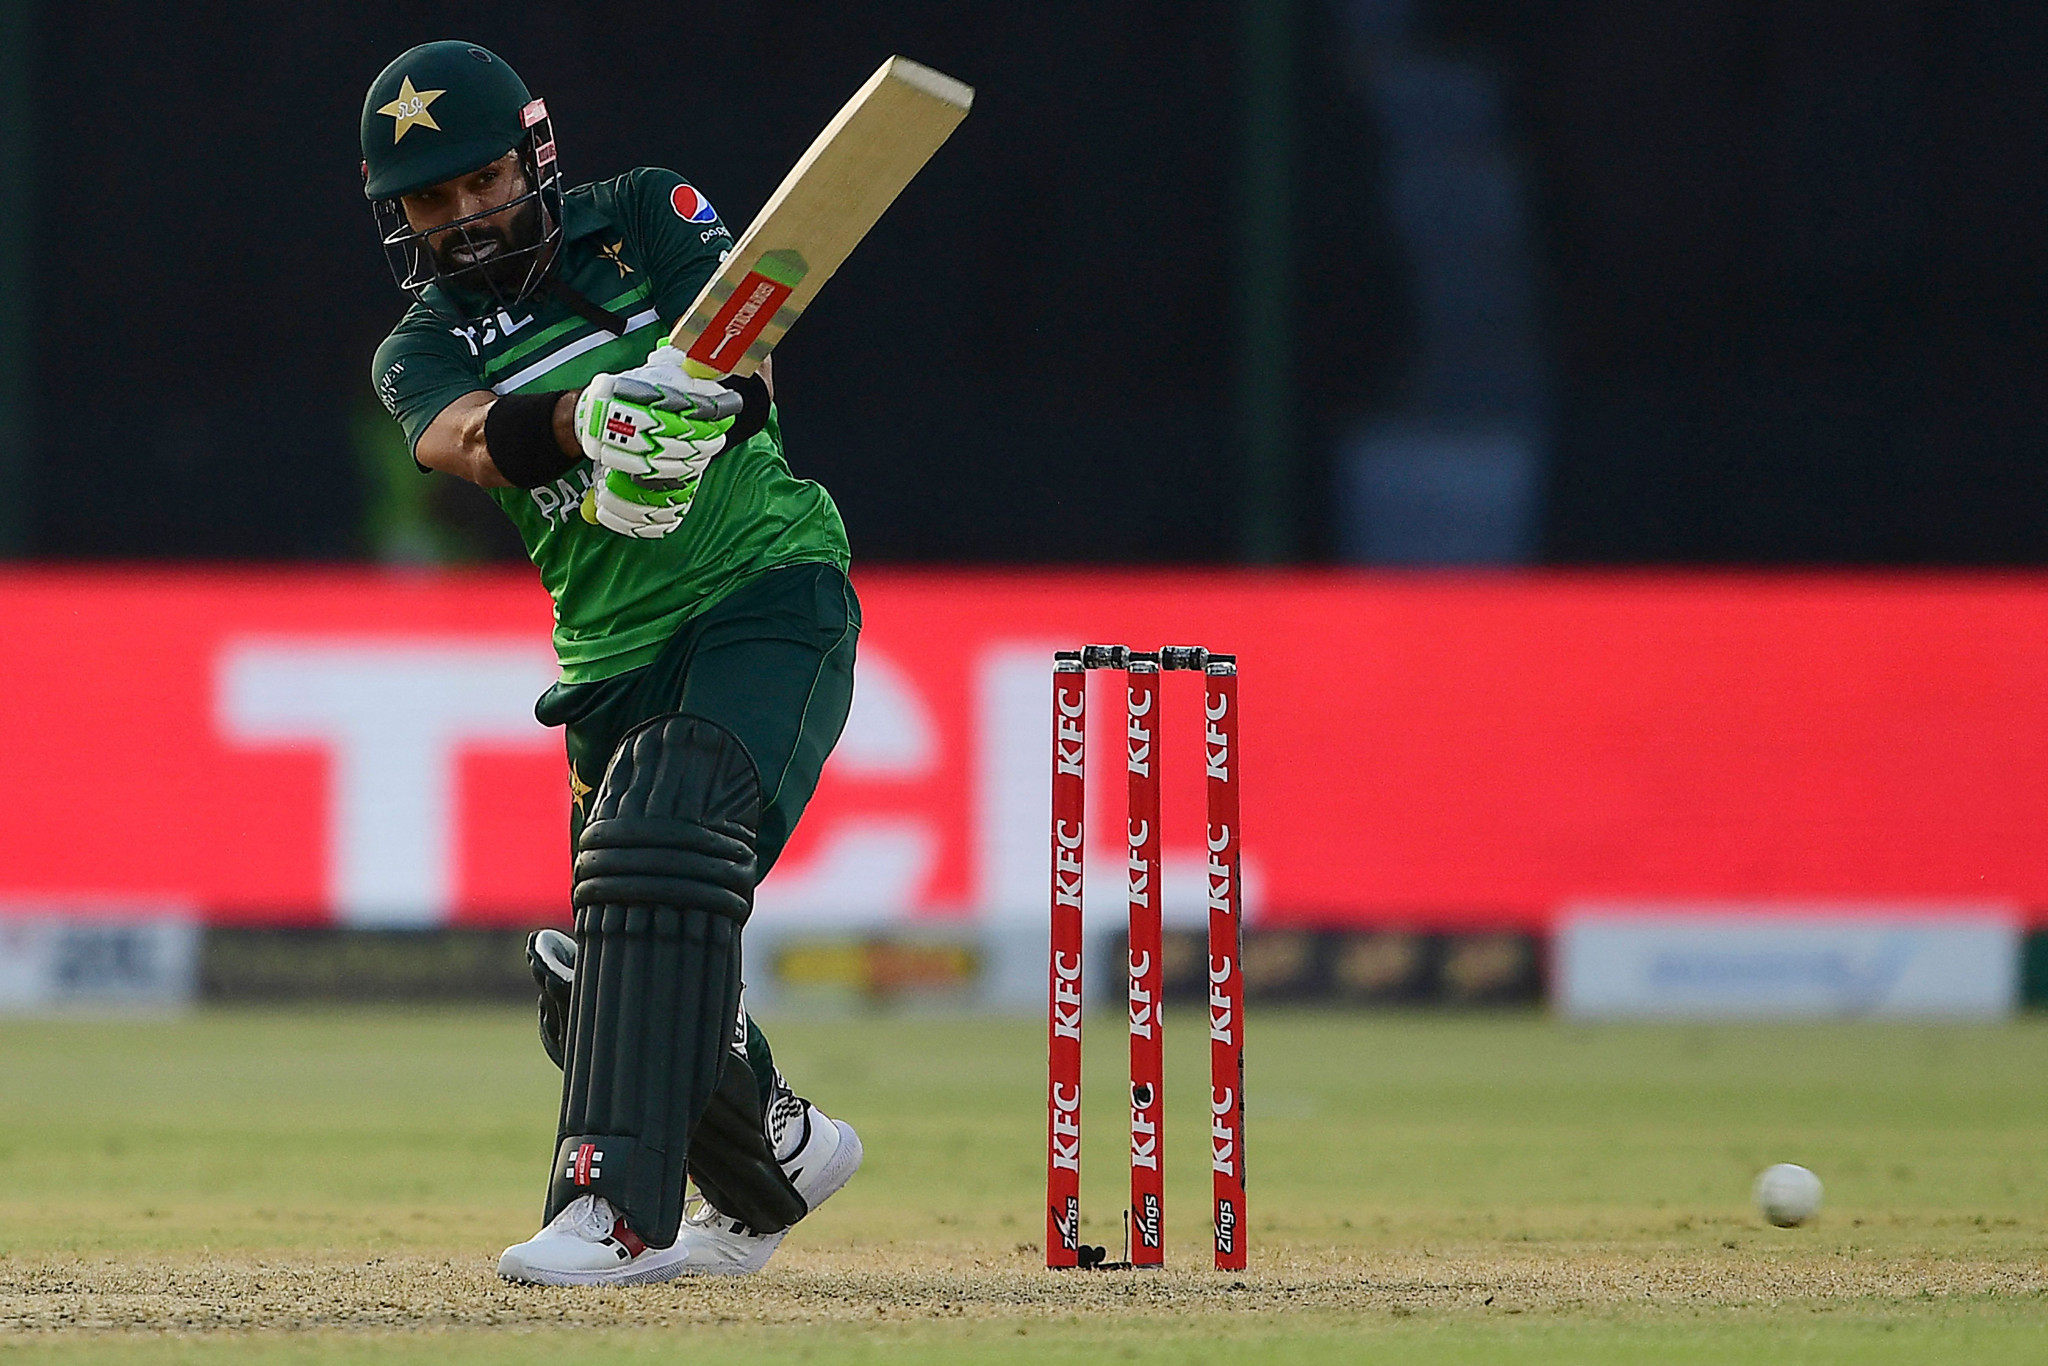 Muhammad Rizwan made 68 as Pakistan beat the Netherlands to get off to a winning start at the ICC Men's Cricket World Cup ©Getty Images